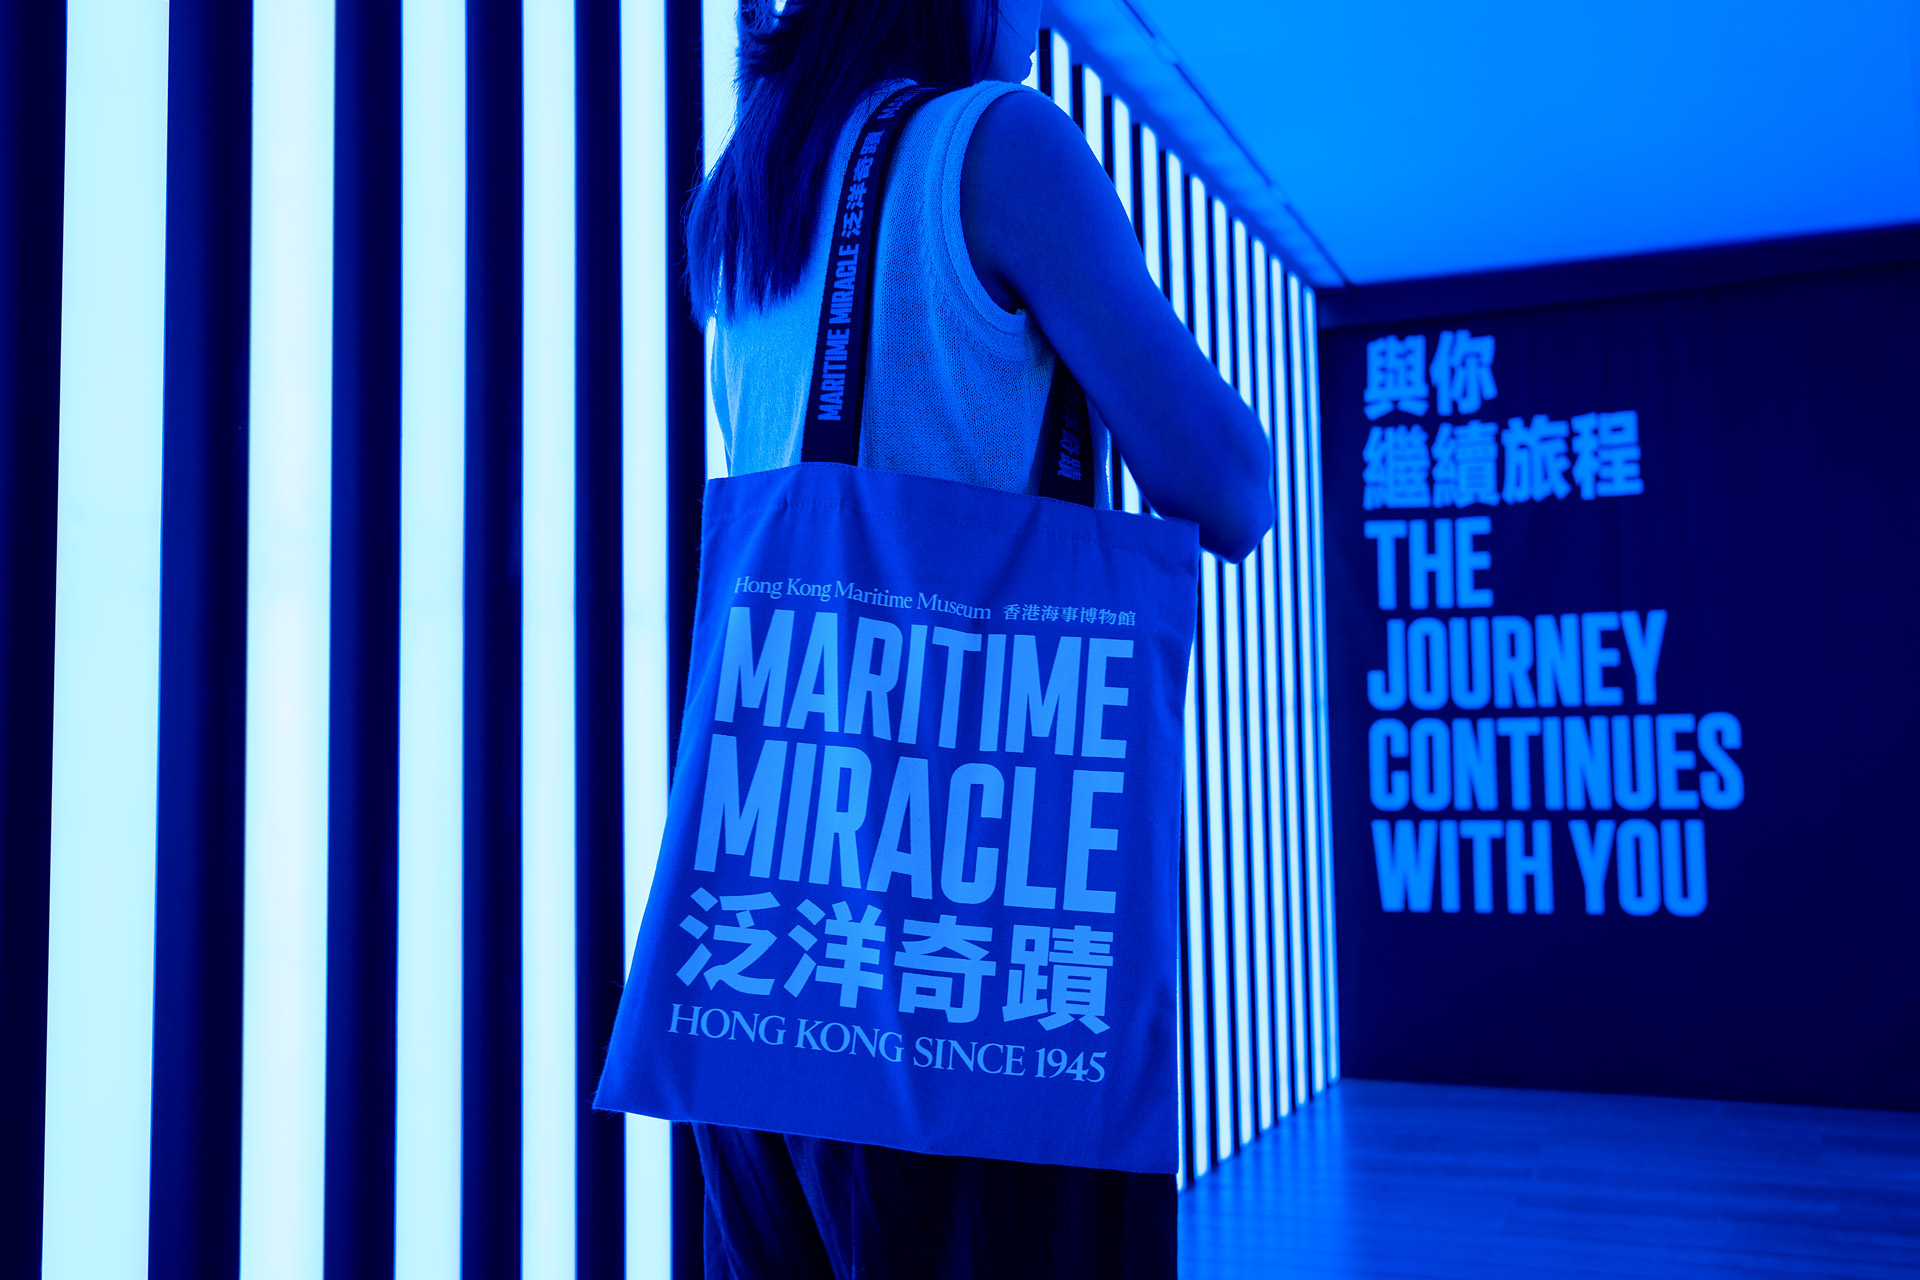 maritime-miracle_36